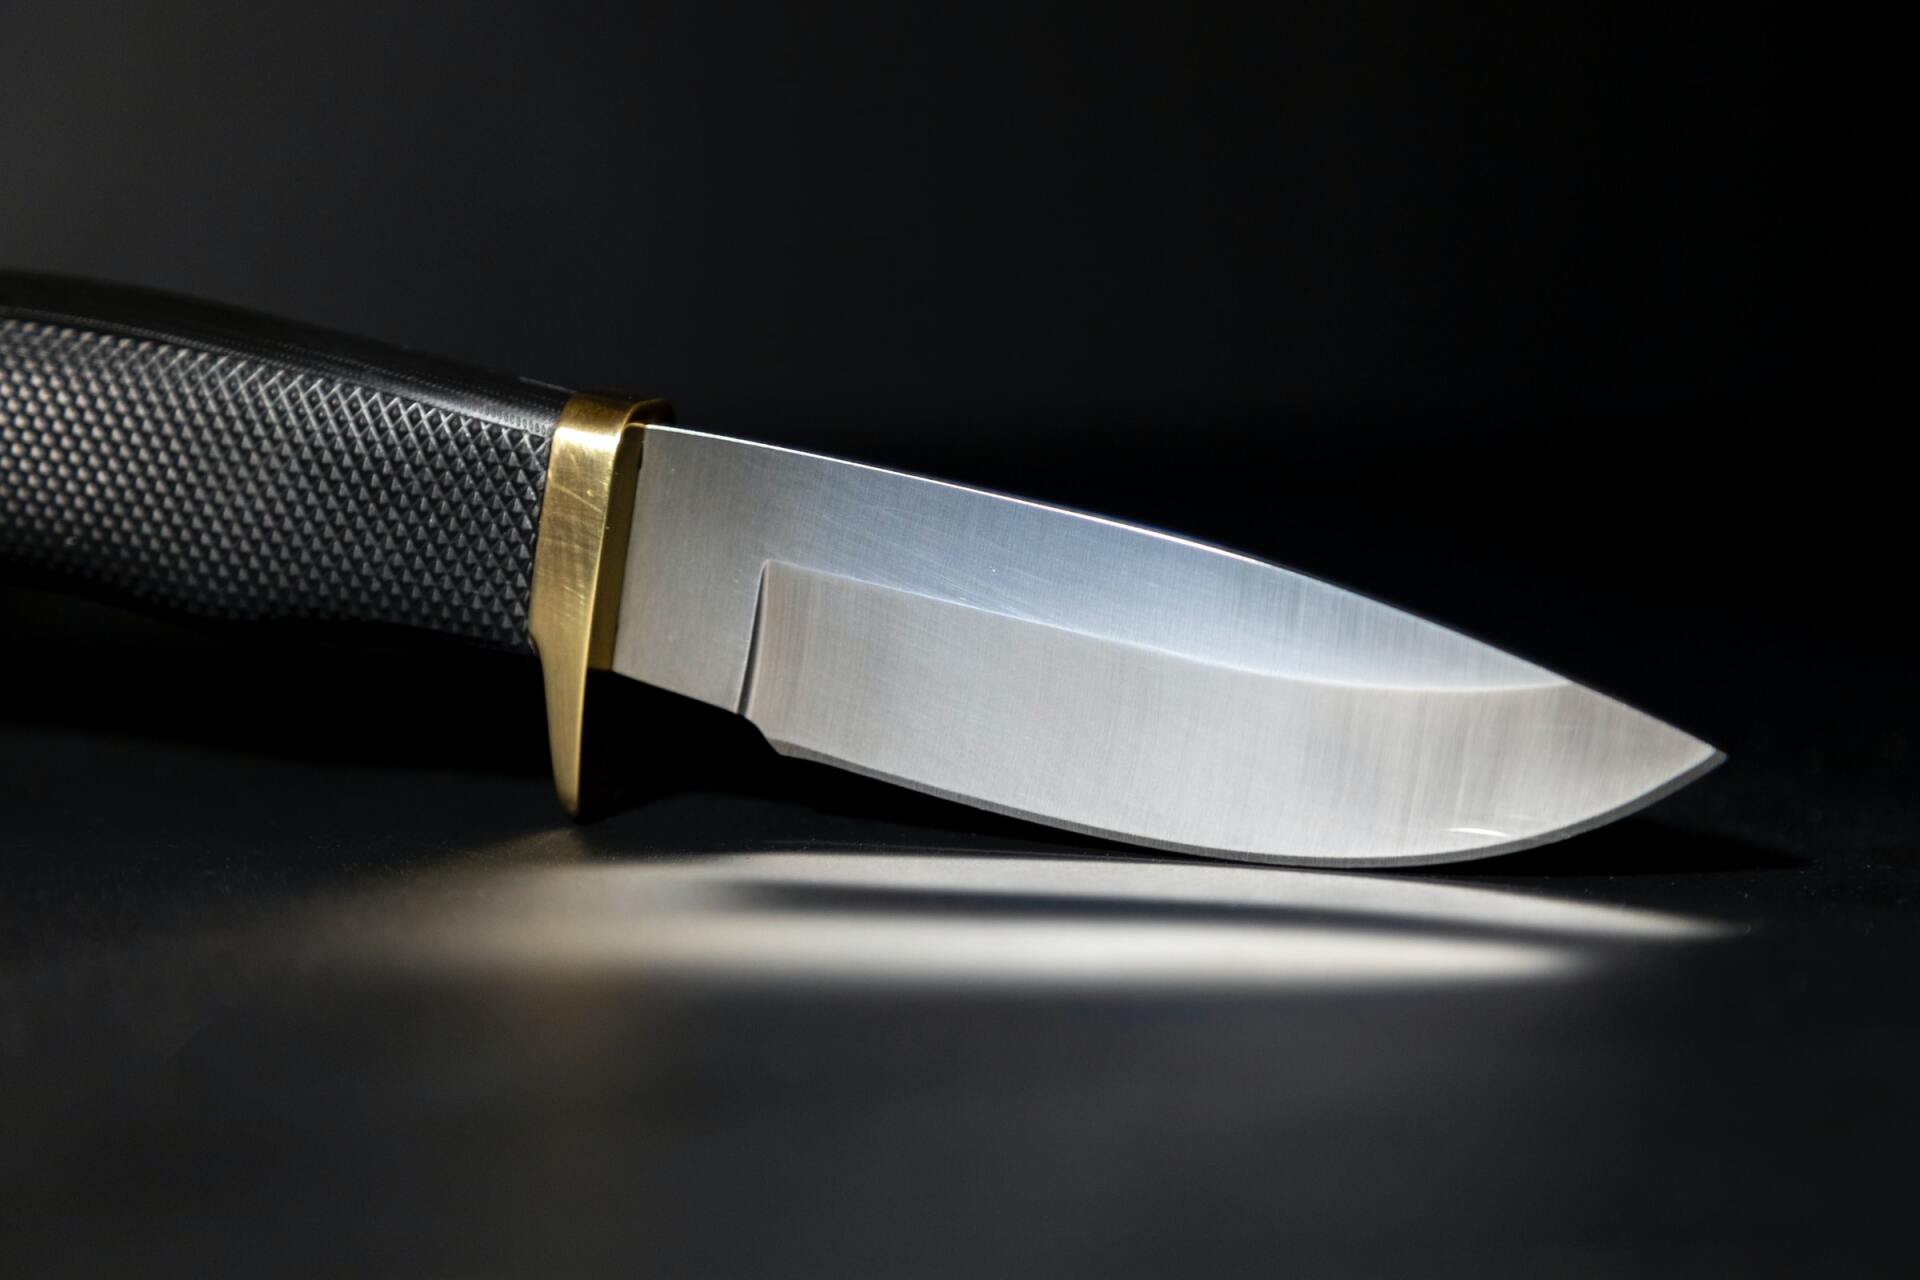 Knife used in crimes